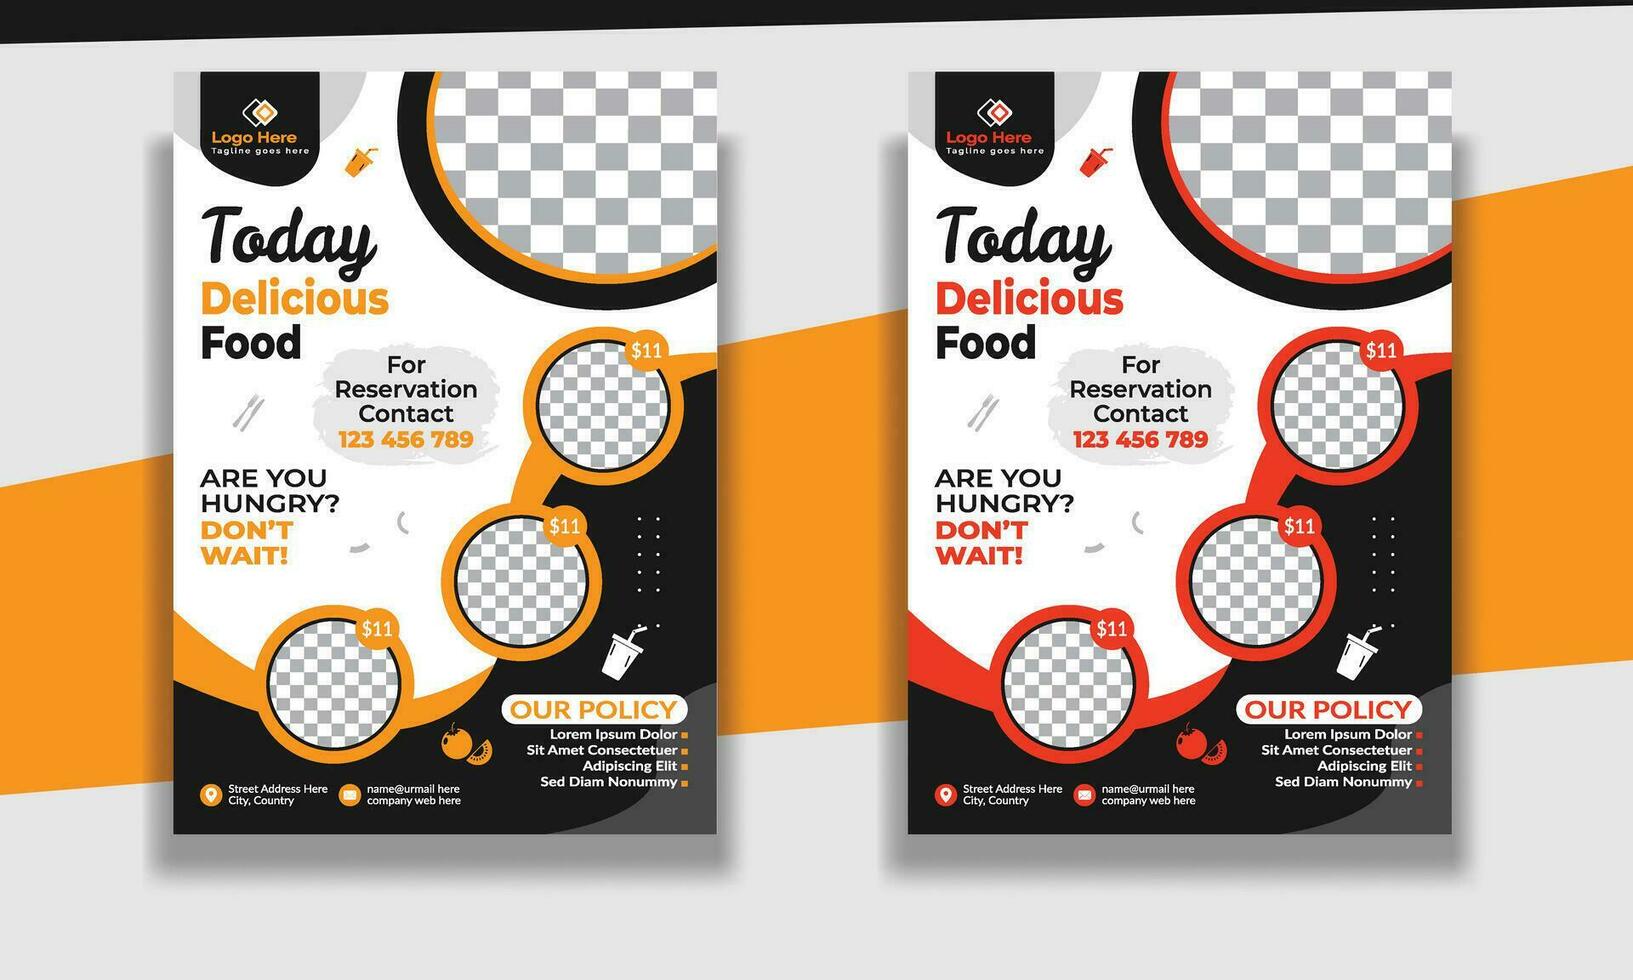 Fast Food Flyer Design Template cooking, restaurant menu, food ordering, Pizza, Burger, French fries and Soda. Vector illustration for poster, flyer, cover, menu, brochure.